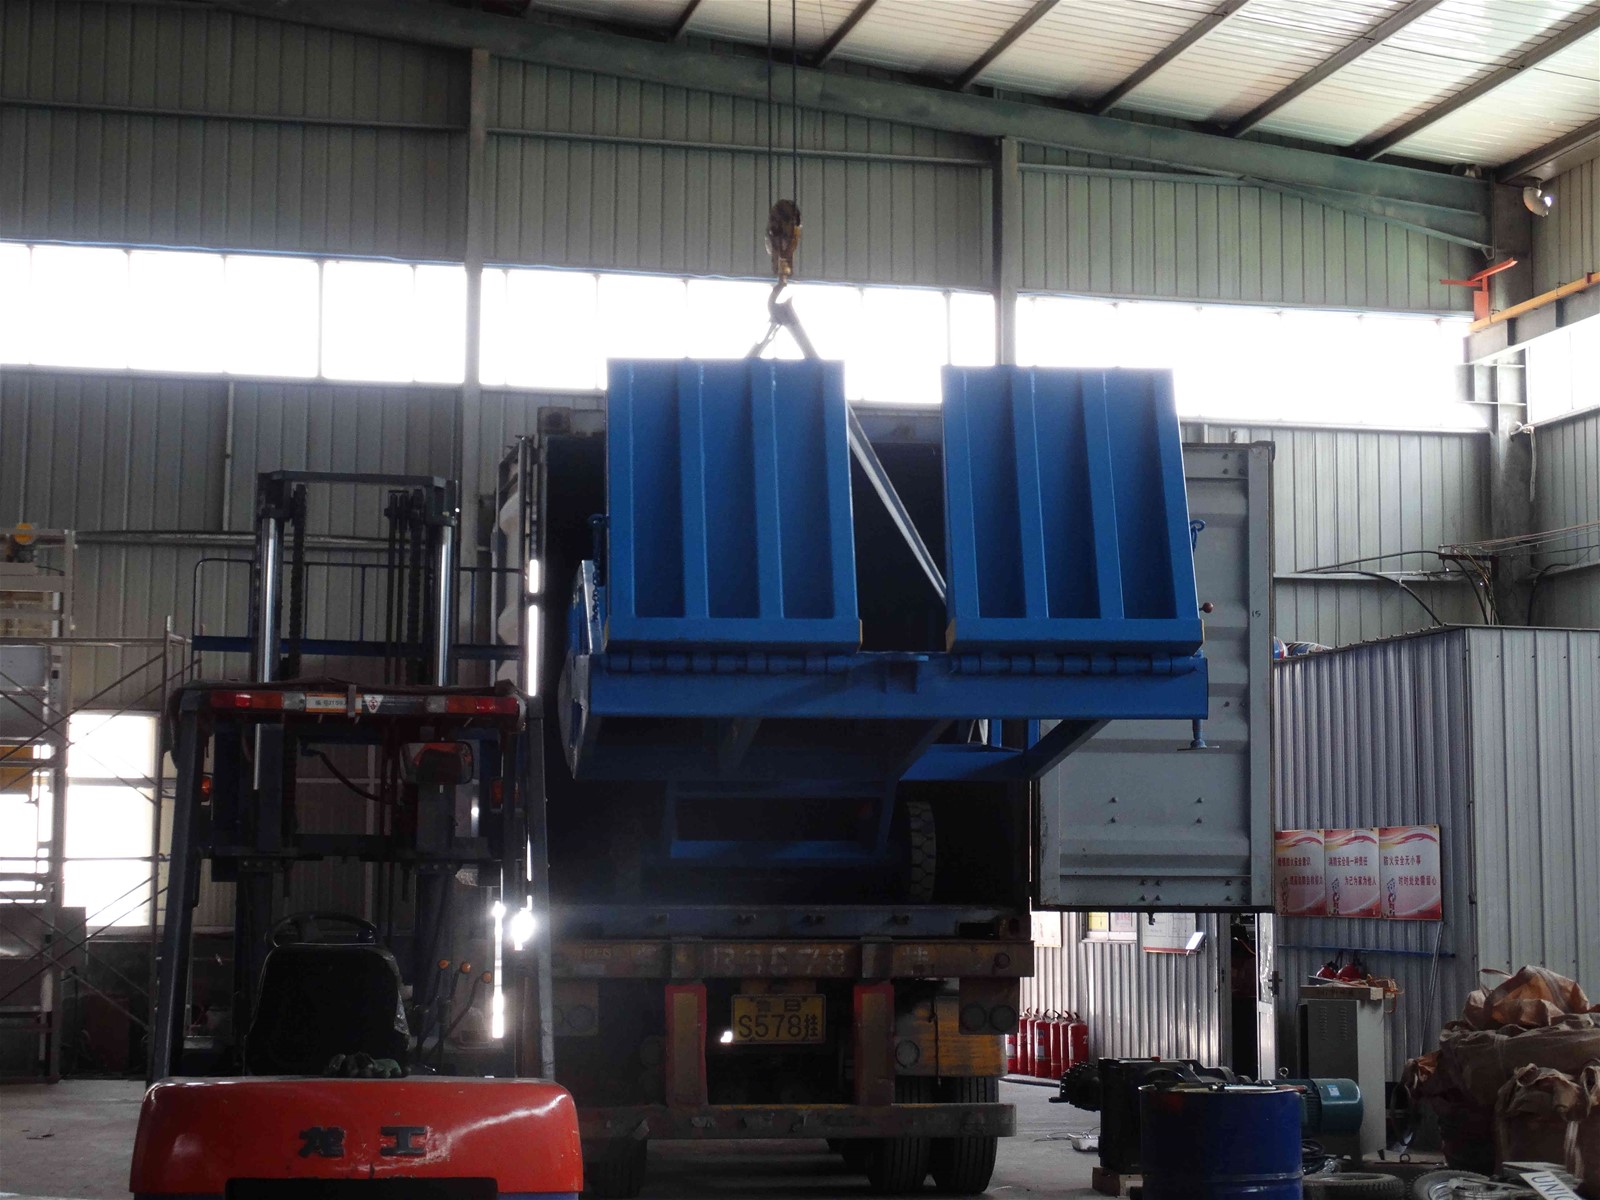 Mobile dock truck hydraulic container loading ramp